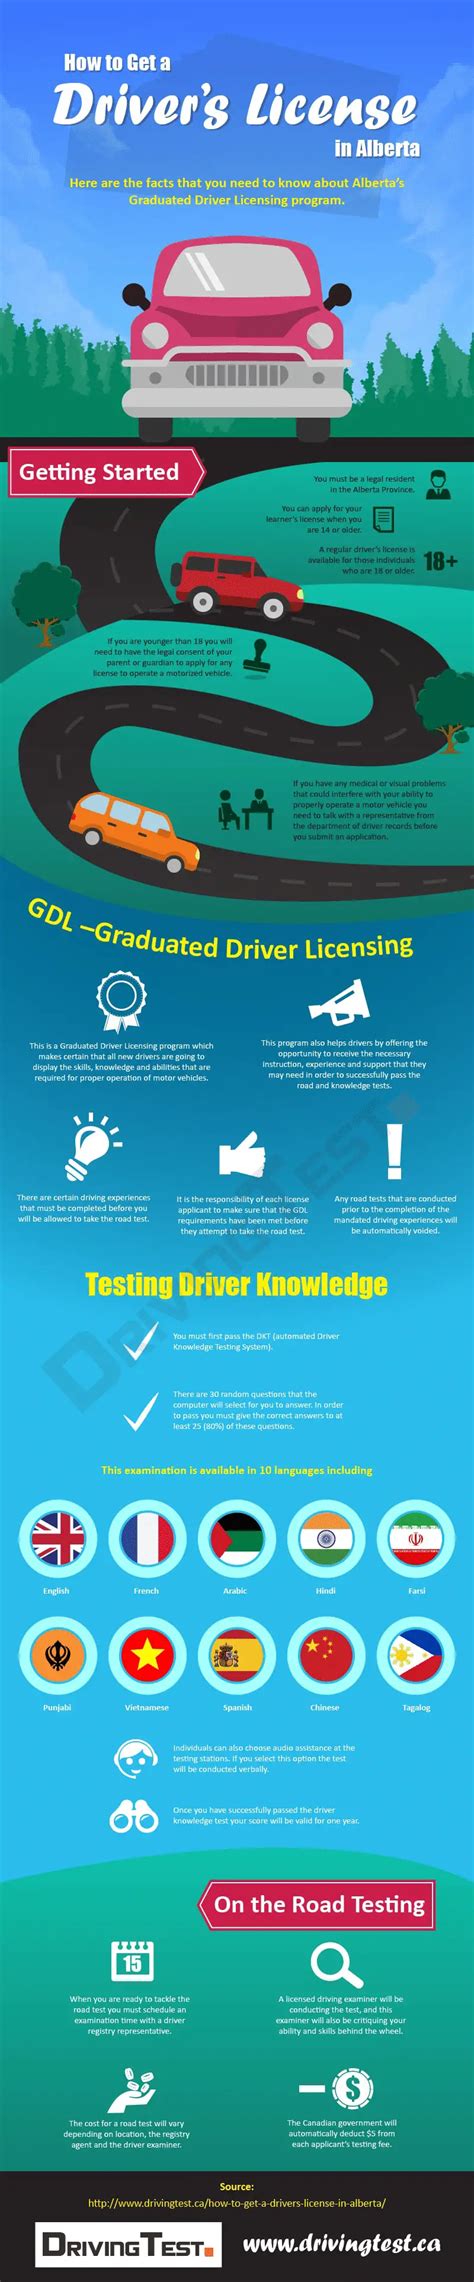 Drivers License Alberta Step By Step Guide To Get It